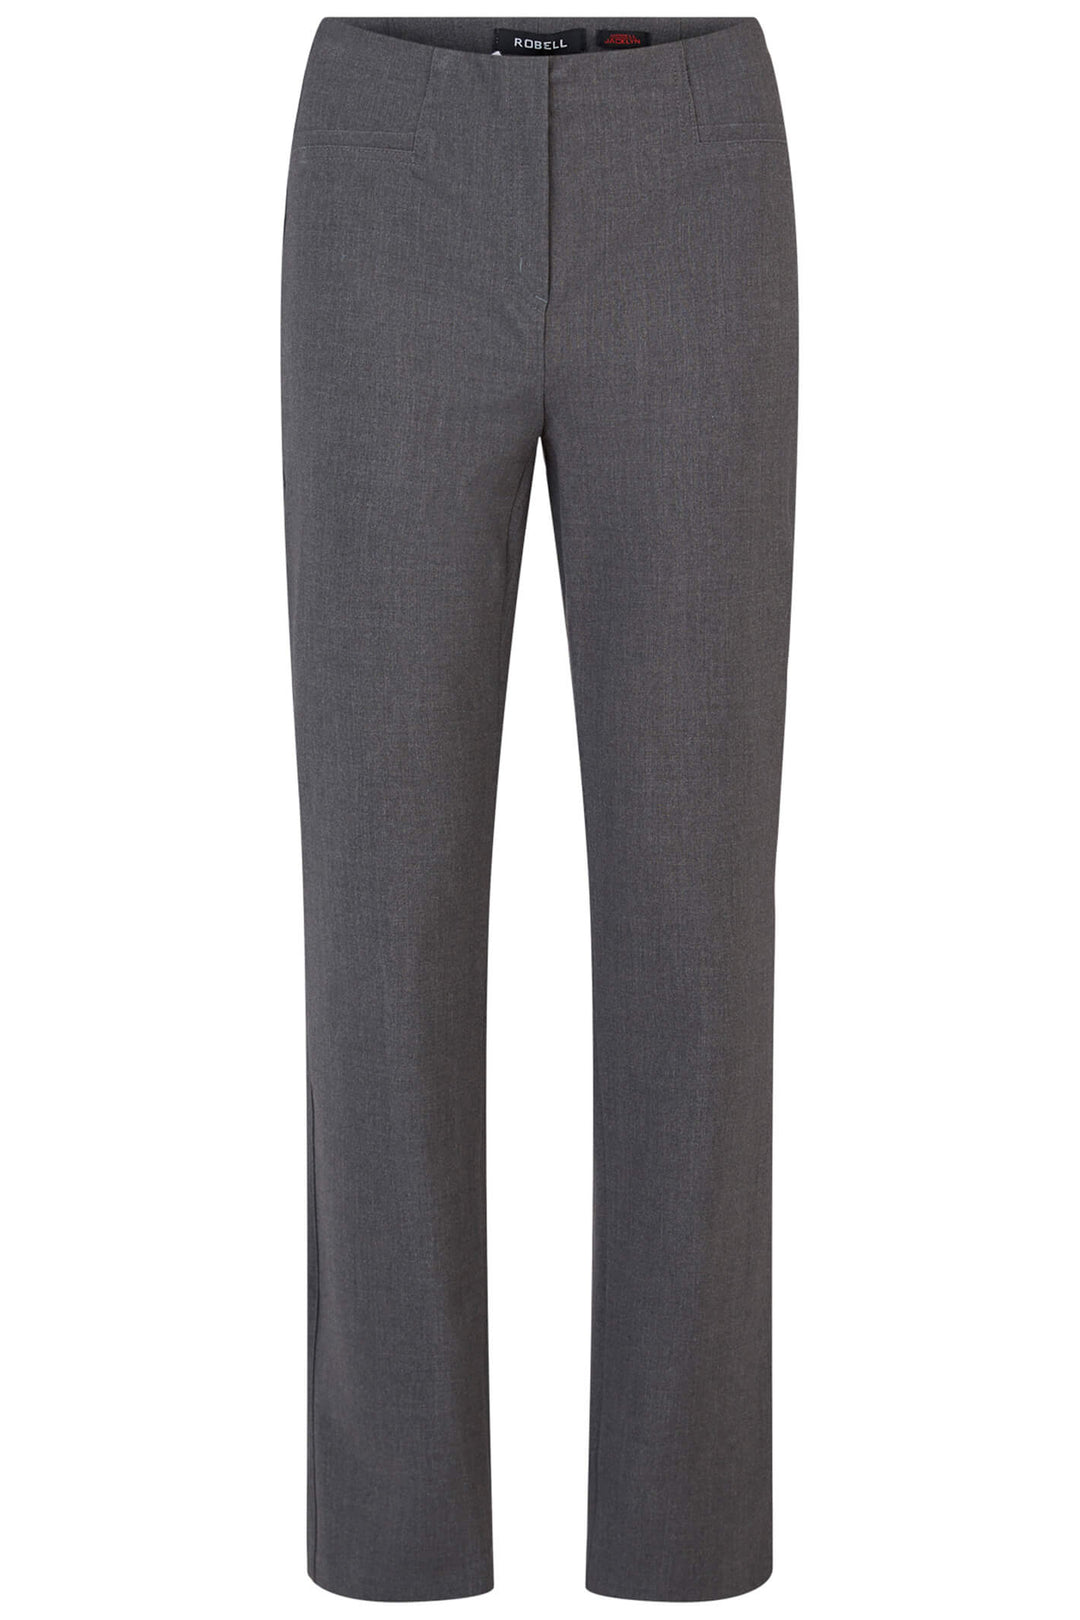 Robell Jacklyn 51408-5689-197 78cm Grey Pull-On Trousers - Shirley Allum Boutique